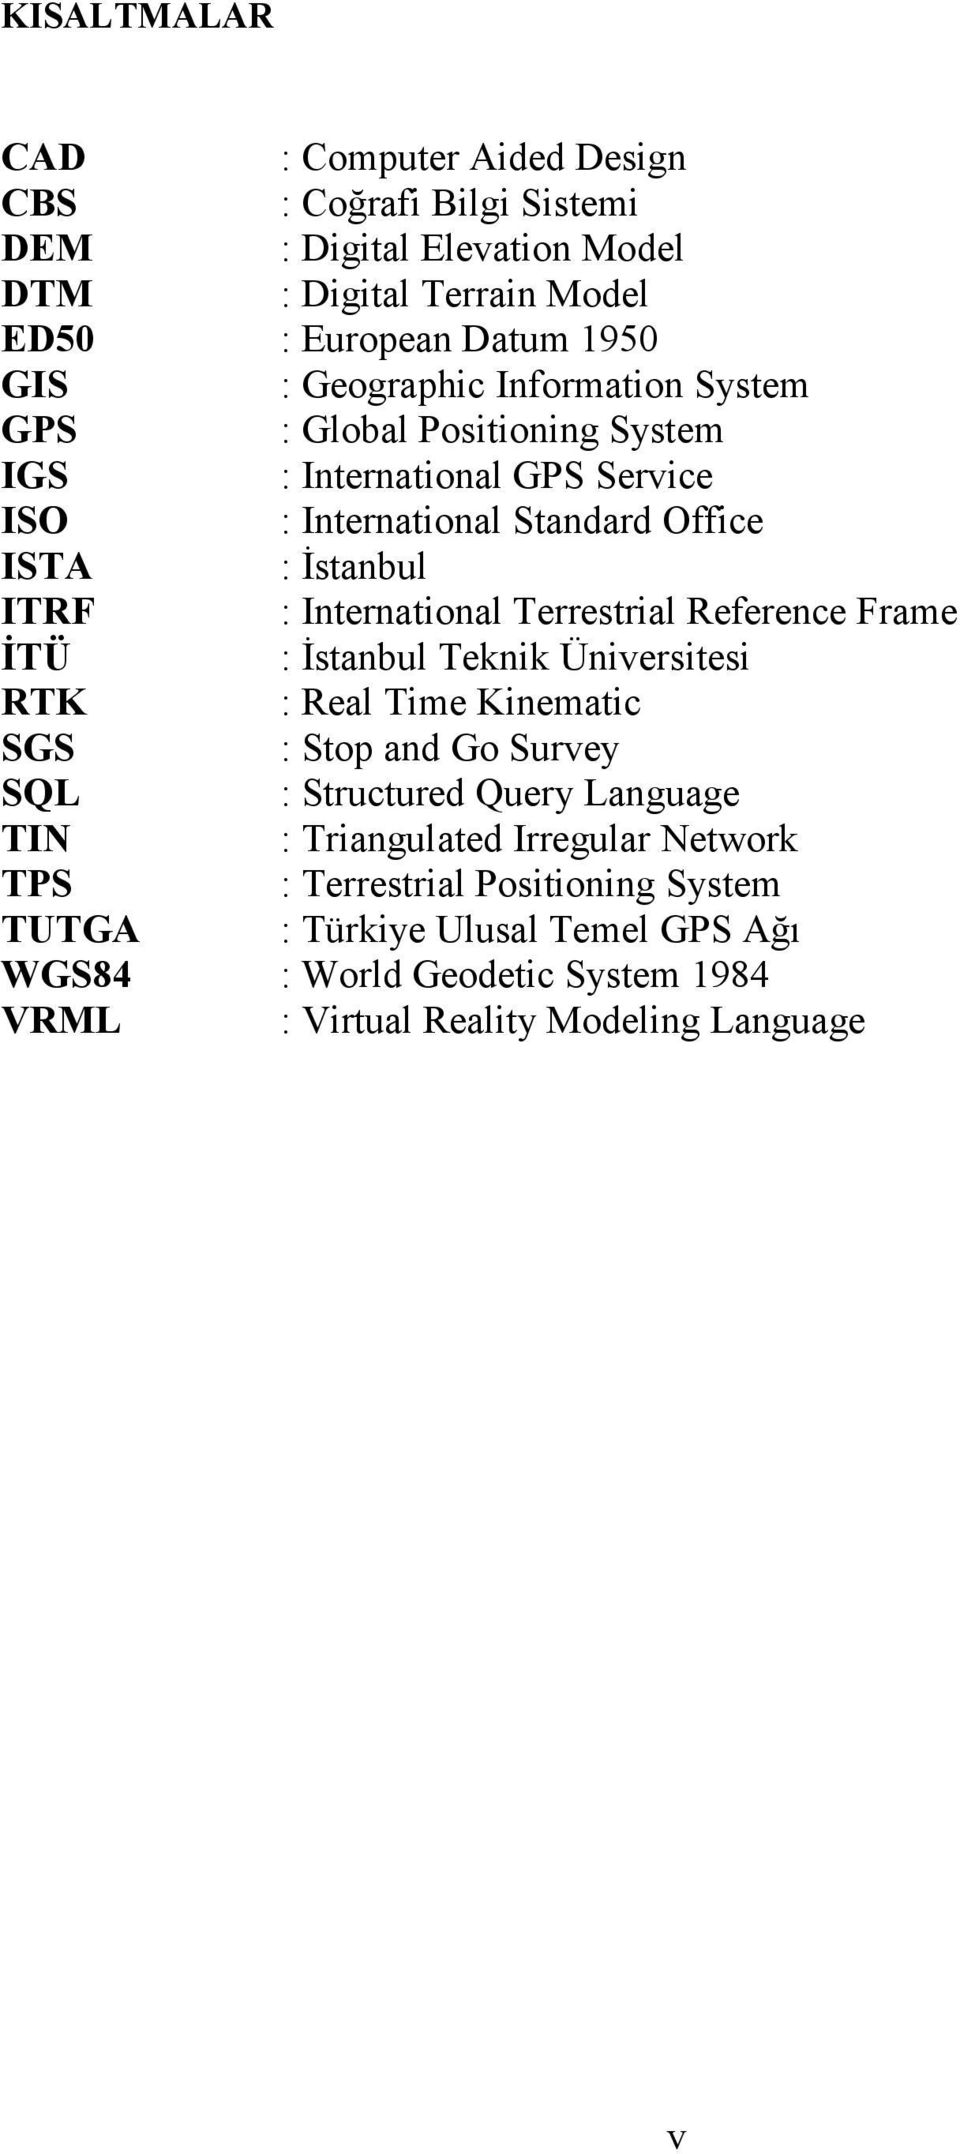 International Terrestrial Reference Frame İTÜ : İstanbul Teknik Üniversitesi RTK : Real Time Kinematic SGS : Stop and Go Survey SQL : Structured Query Language TIN